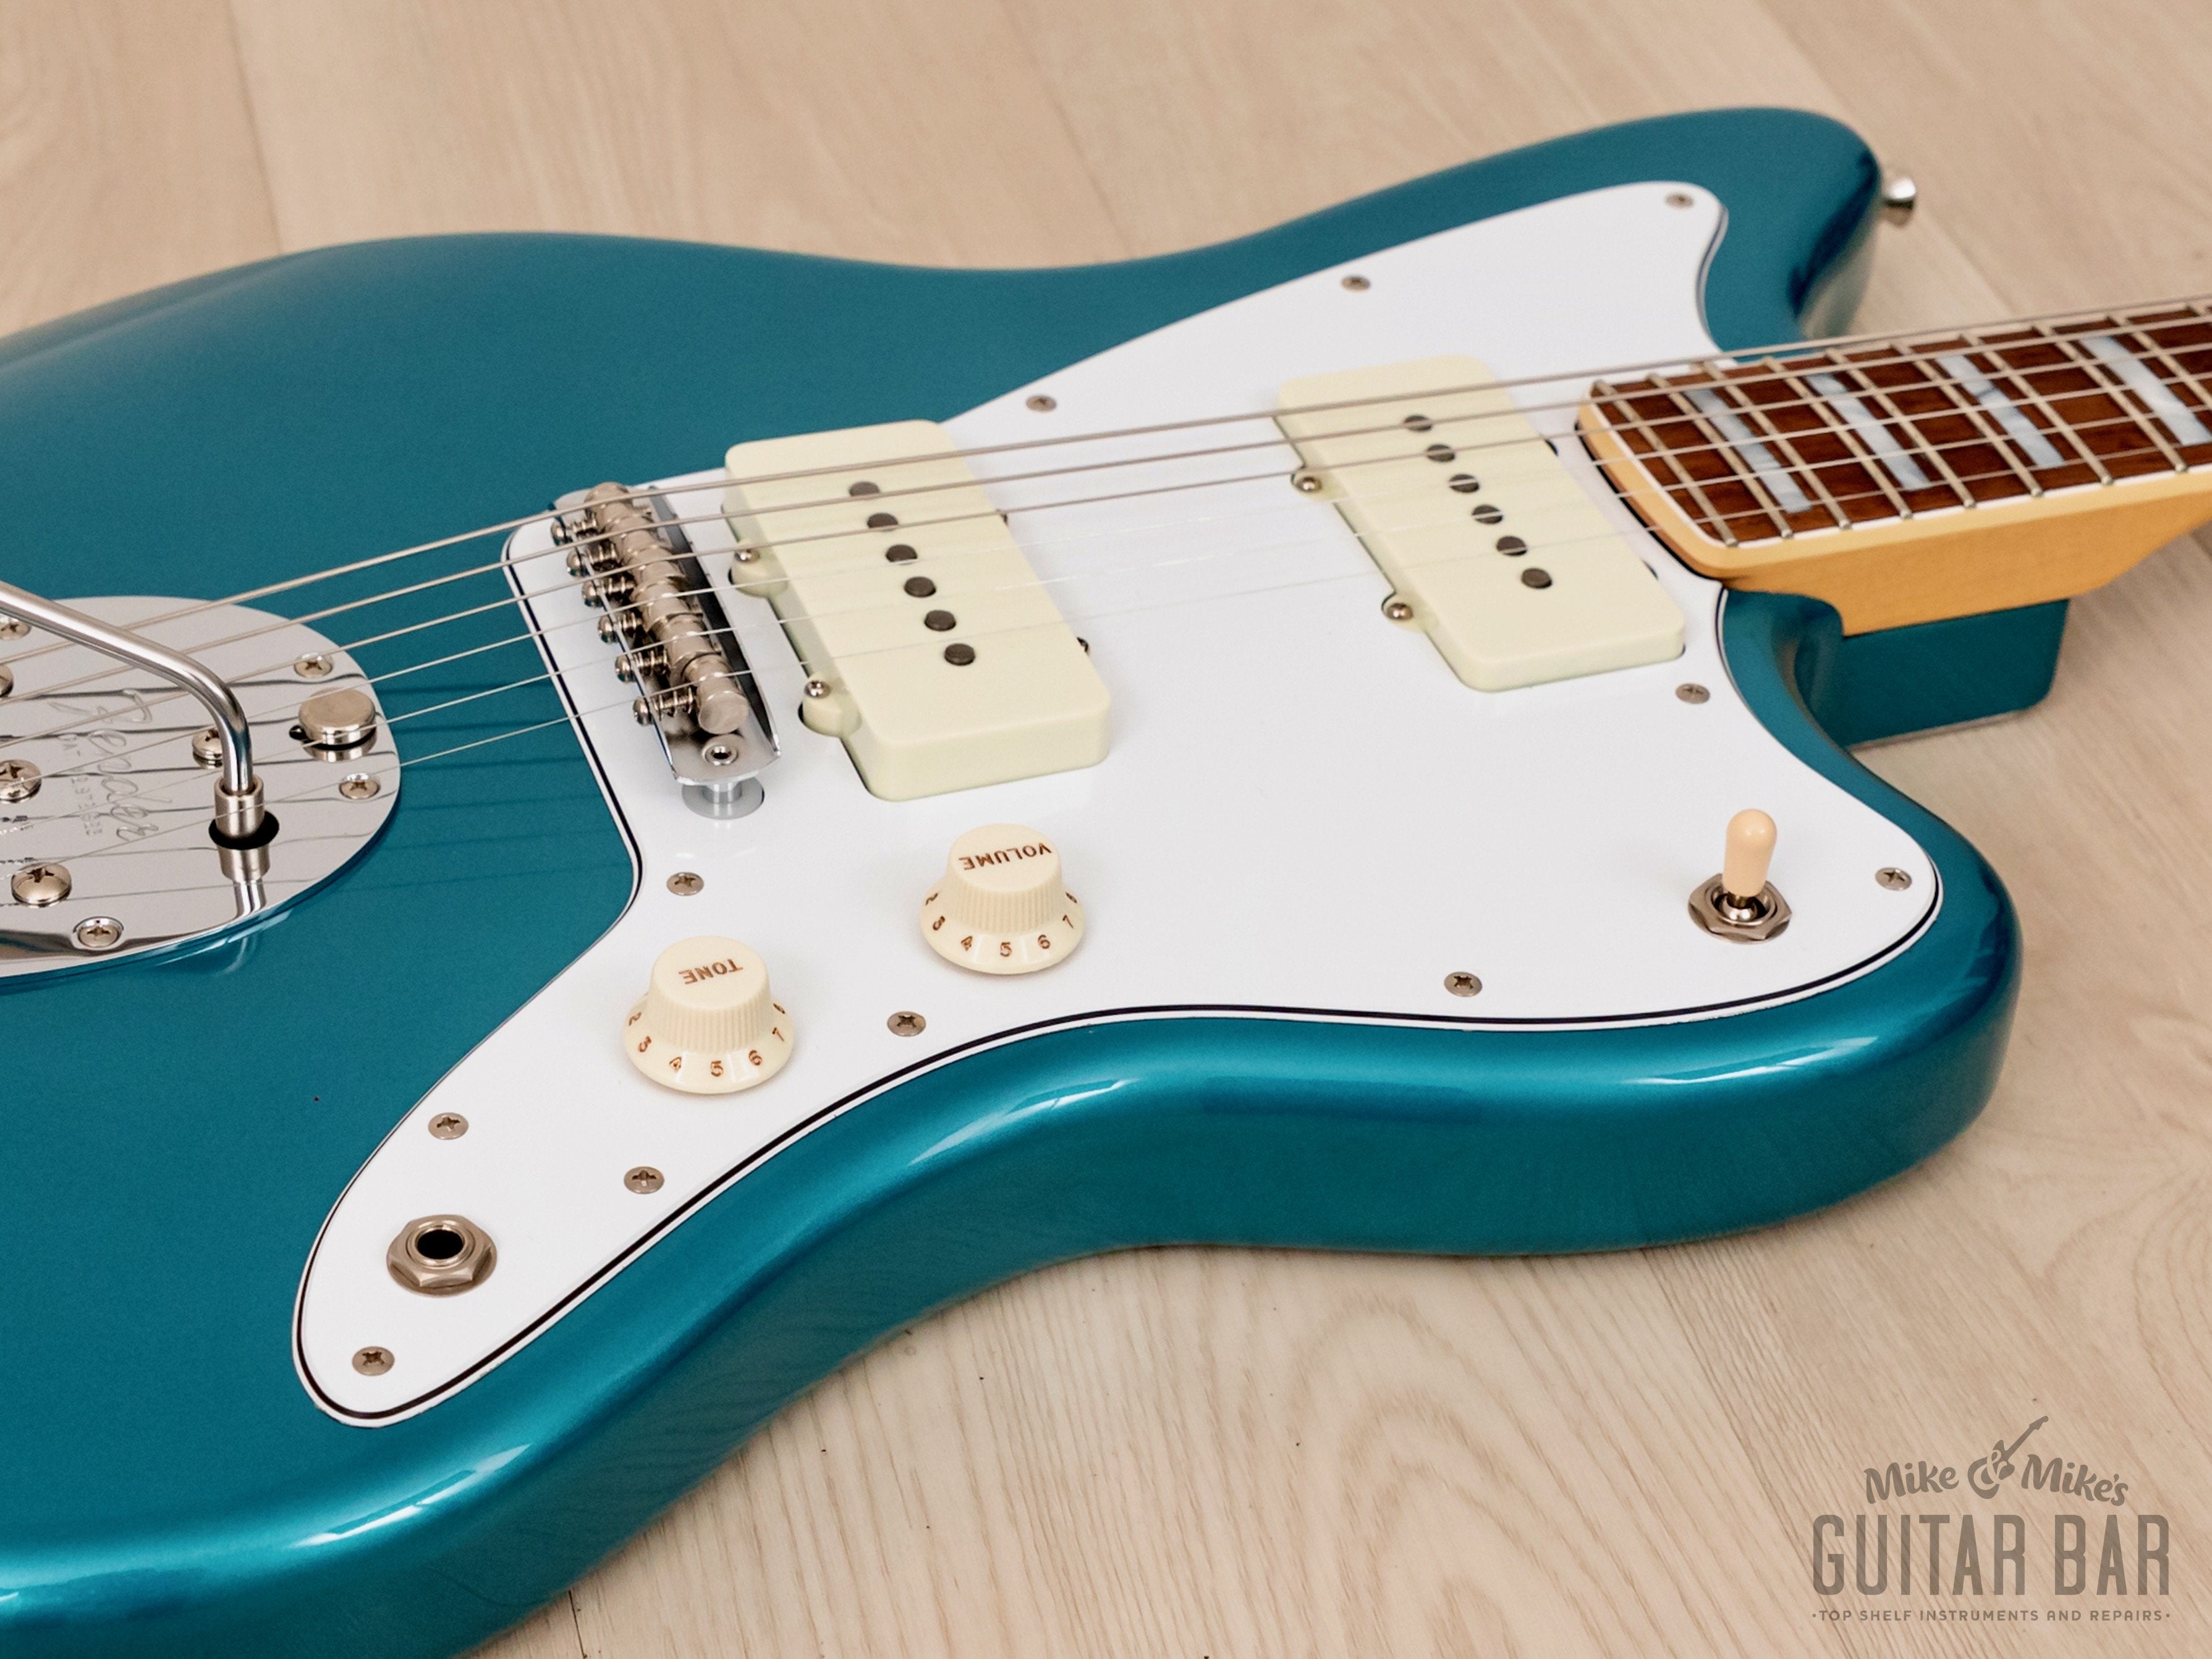 2019 Fender Limited Collection Jazzmaster Ocean Turquoise Lacquer w/ Case, COA & Hangtags, Japan MIJ